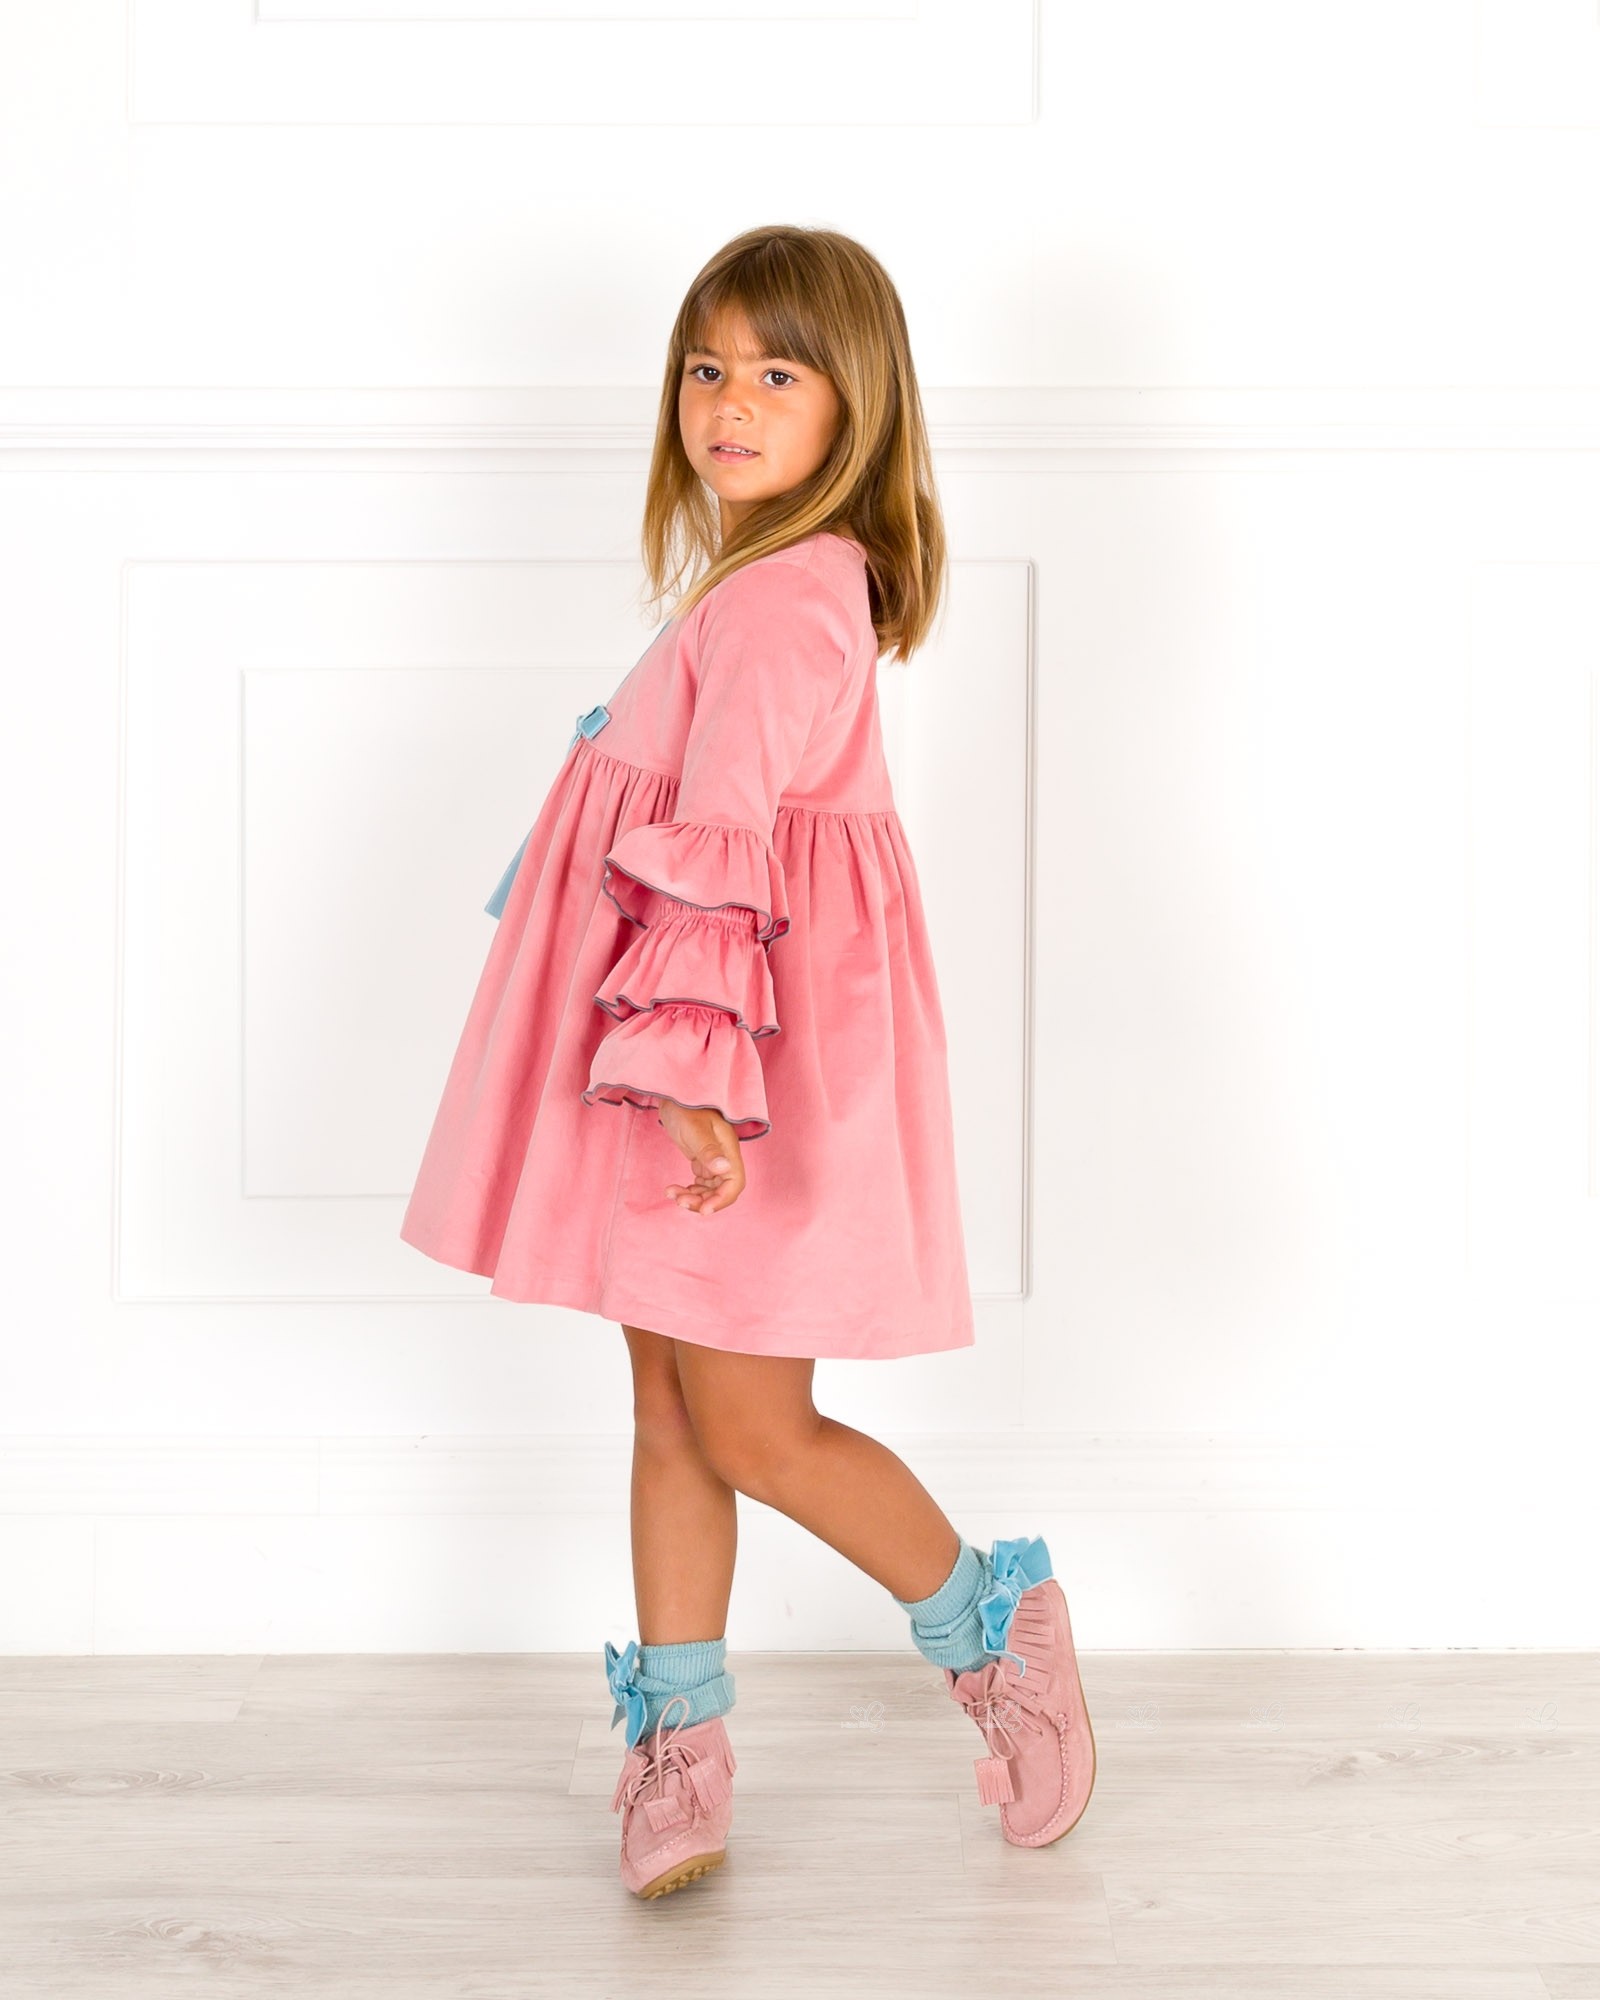 Girls Pink Corduroy Dress Outfit | Missbaby